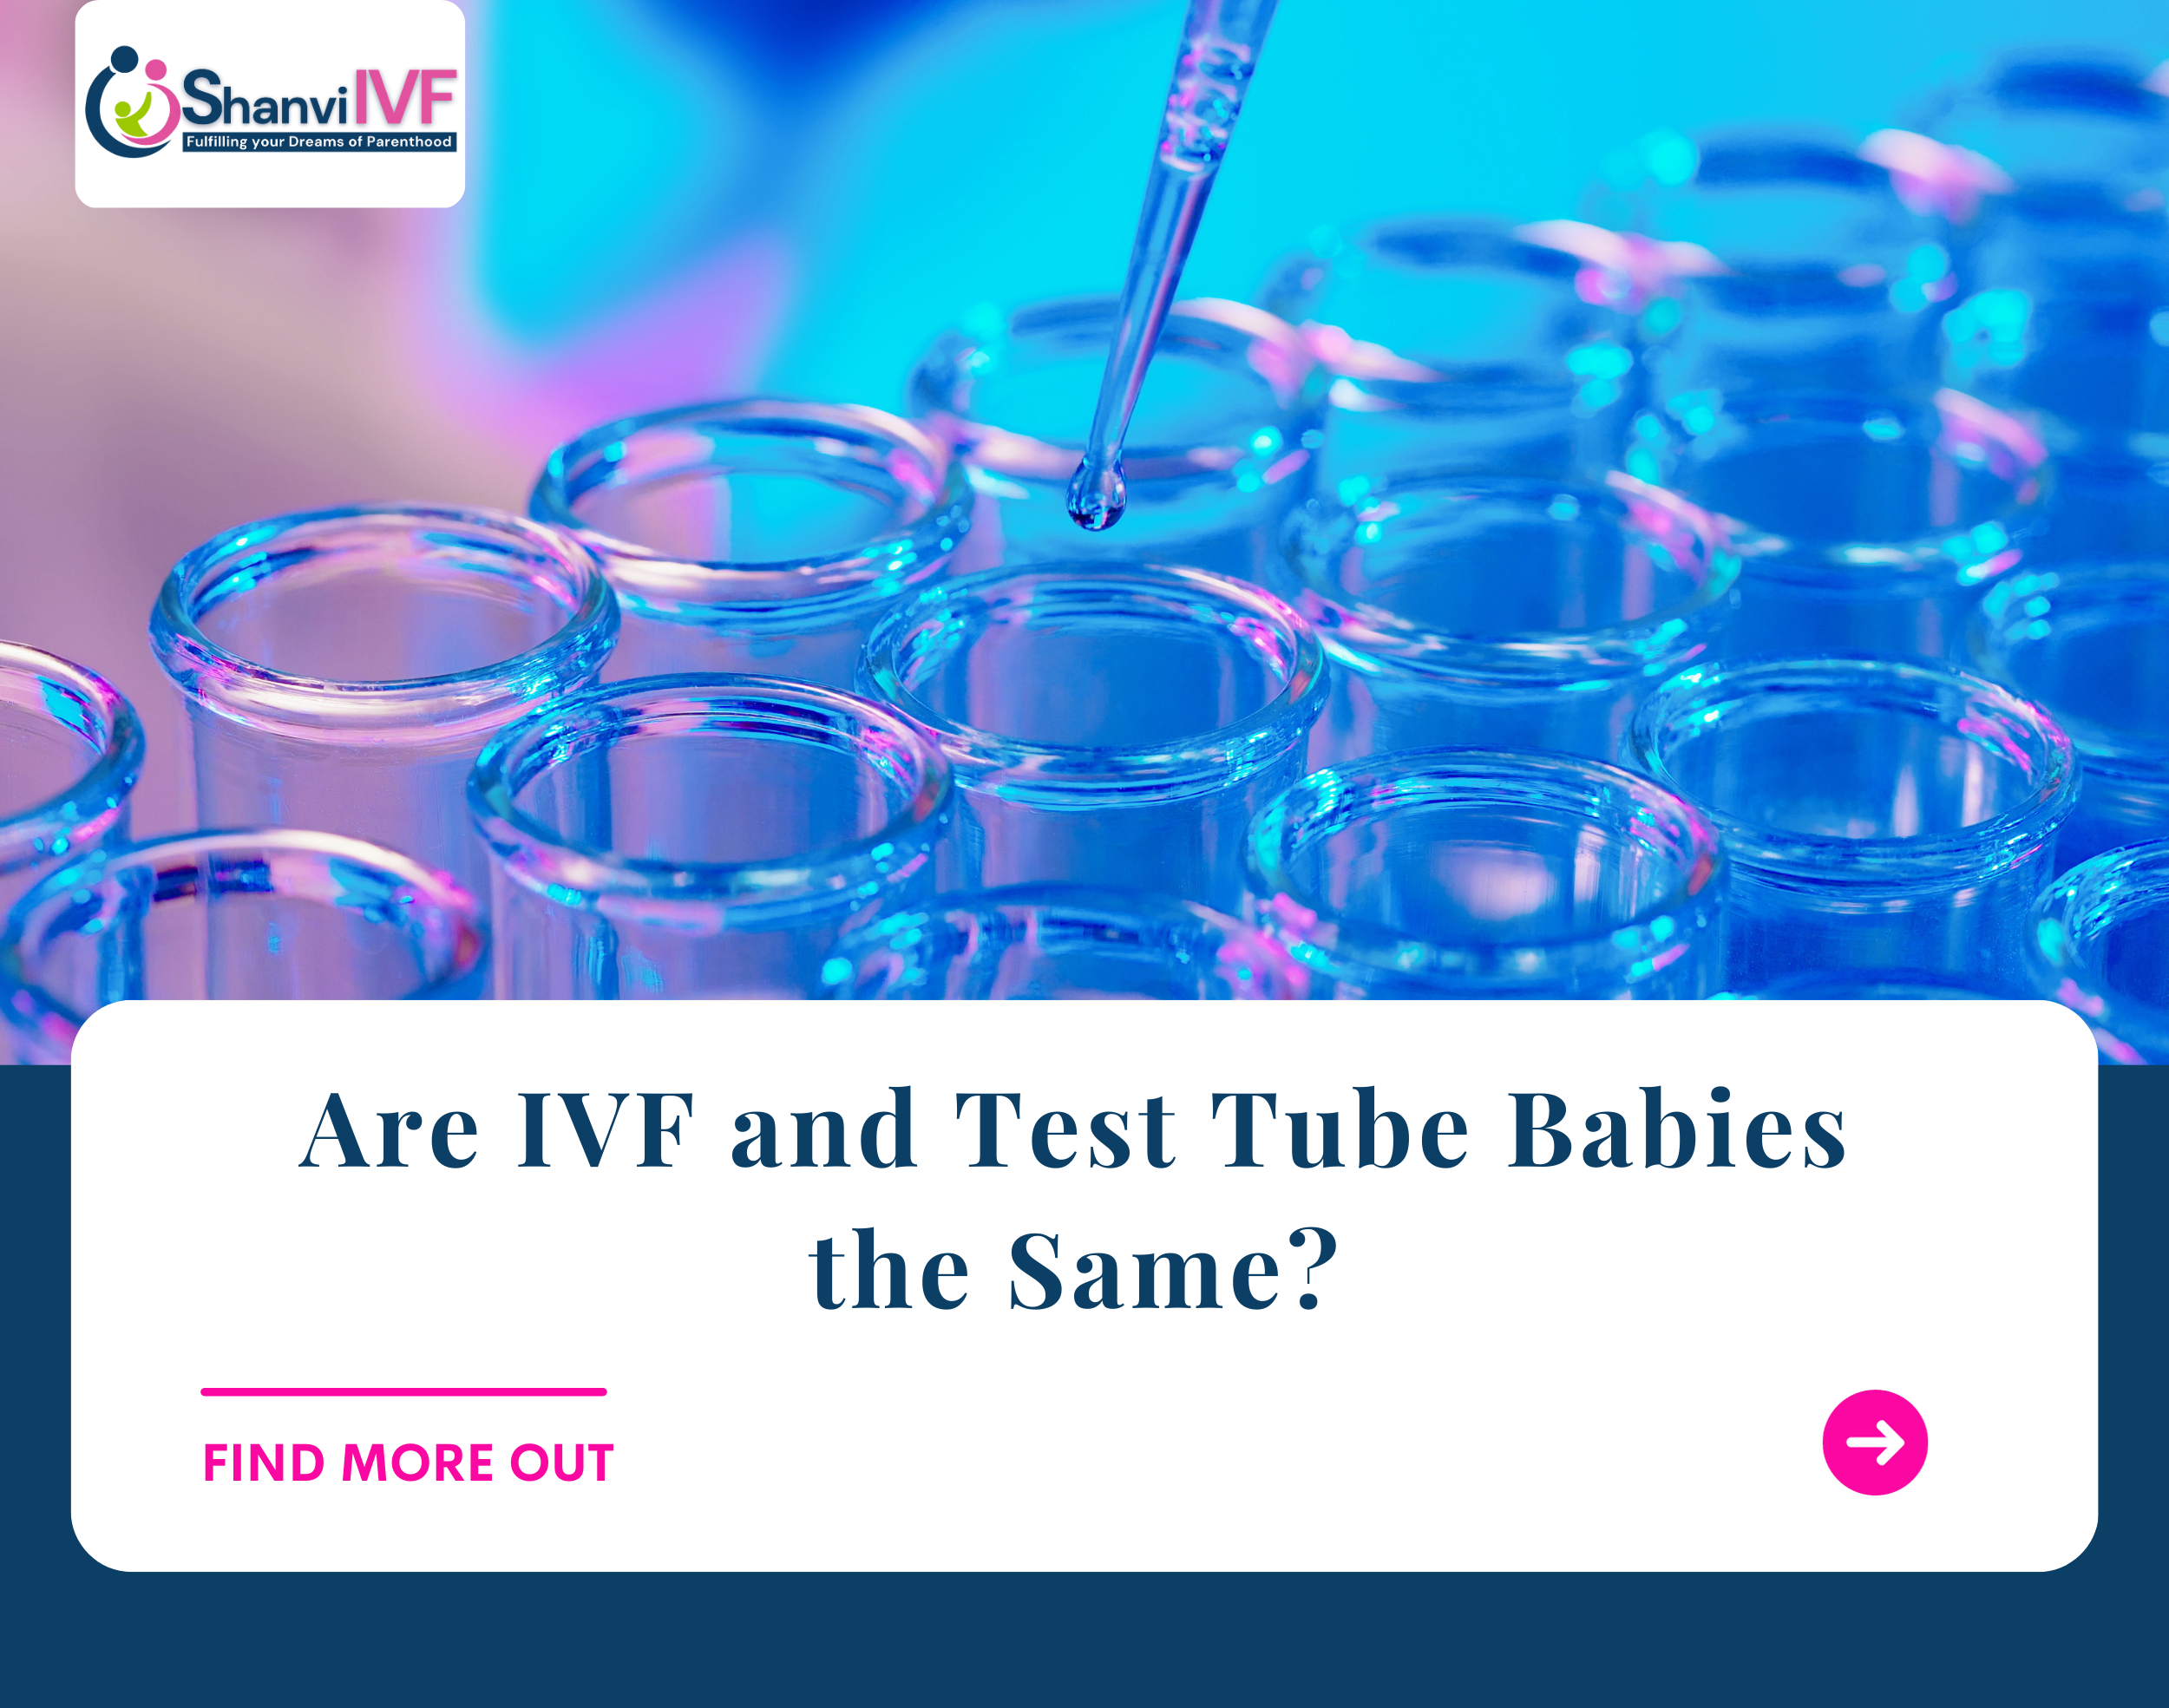 Are IVF and Test Tube Babies the Same?